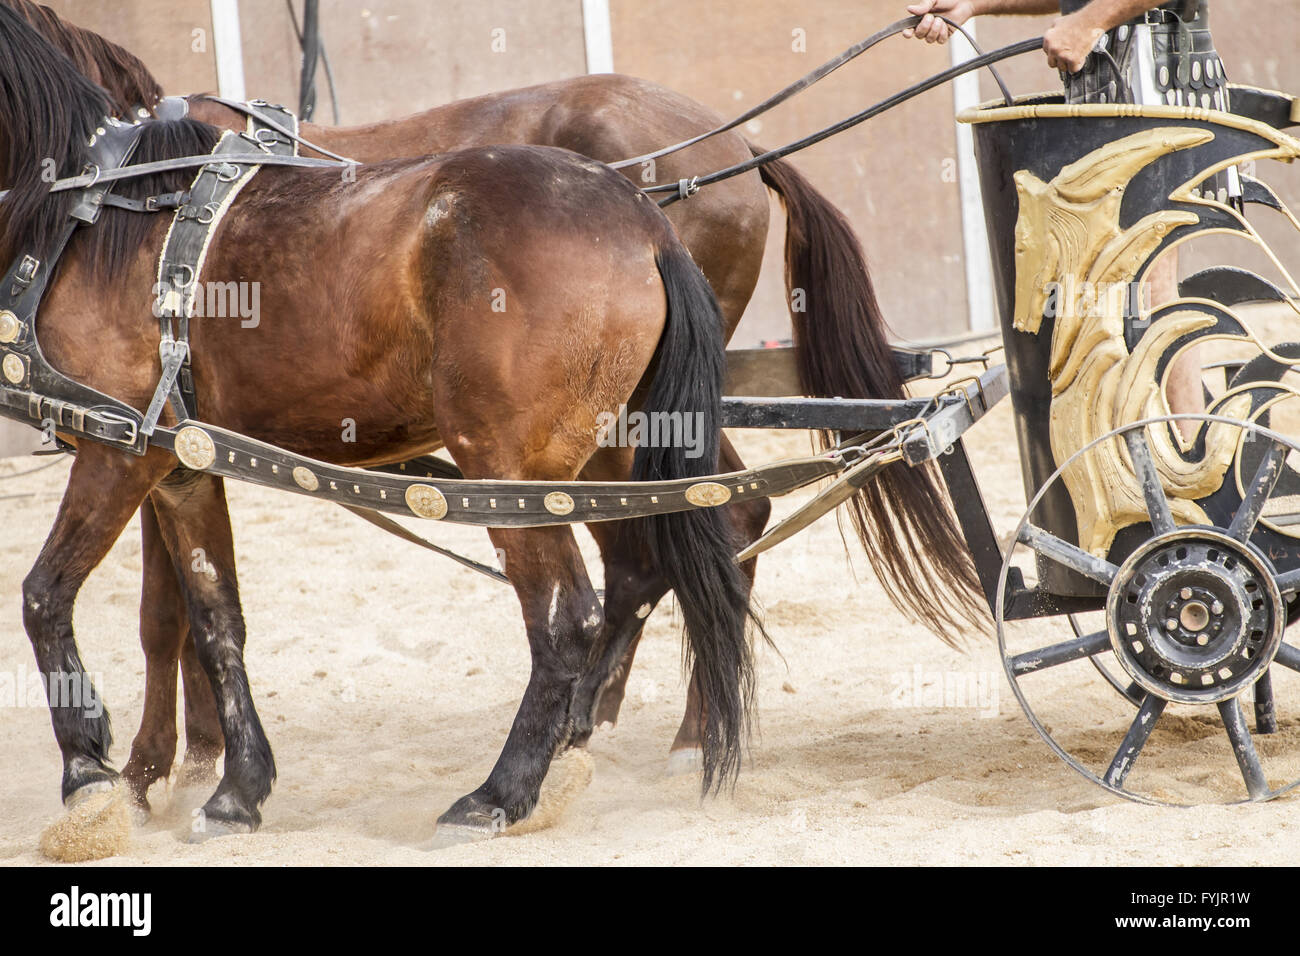 Competitors, Roman chariots in the circus arena, fighting warriors and horses Stock Photo